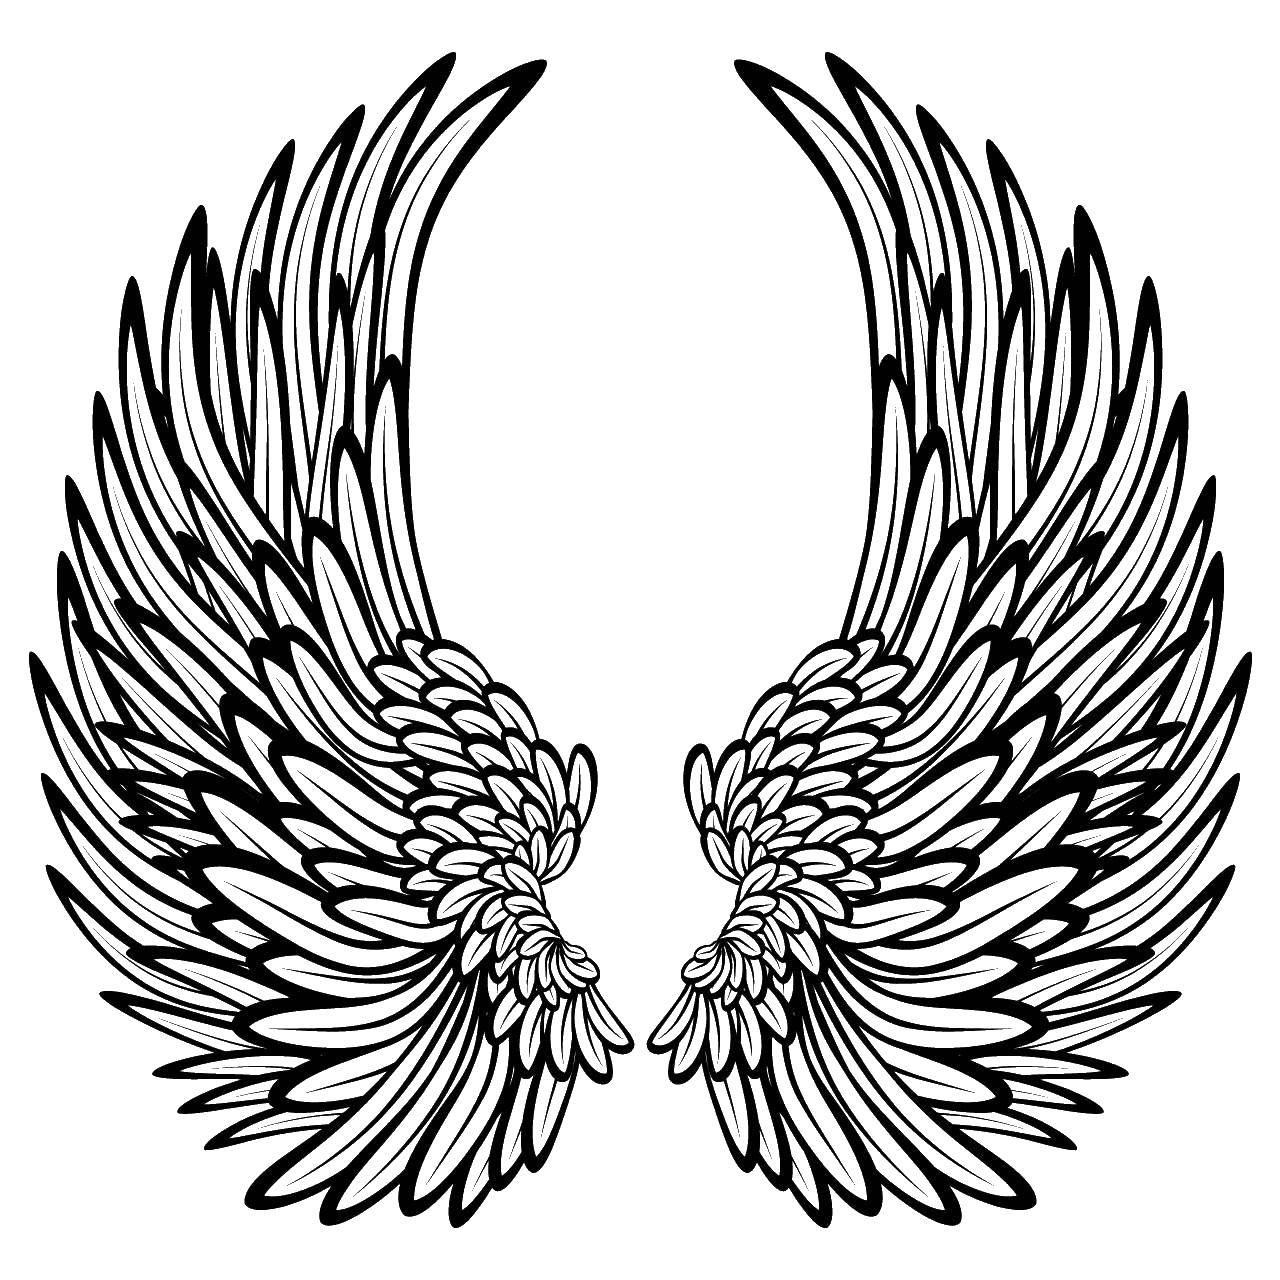 Coloring Large wings. Category coloring. Tags:  wings, feathers.